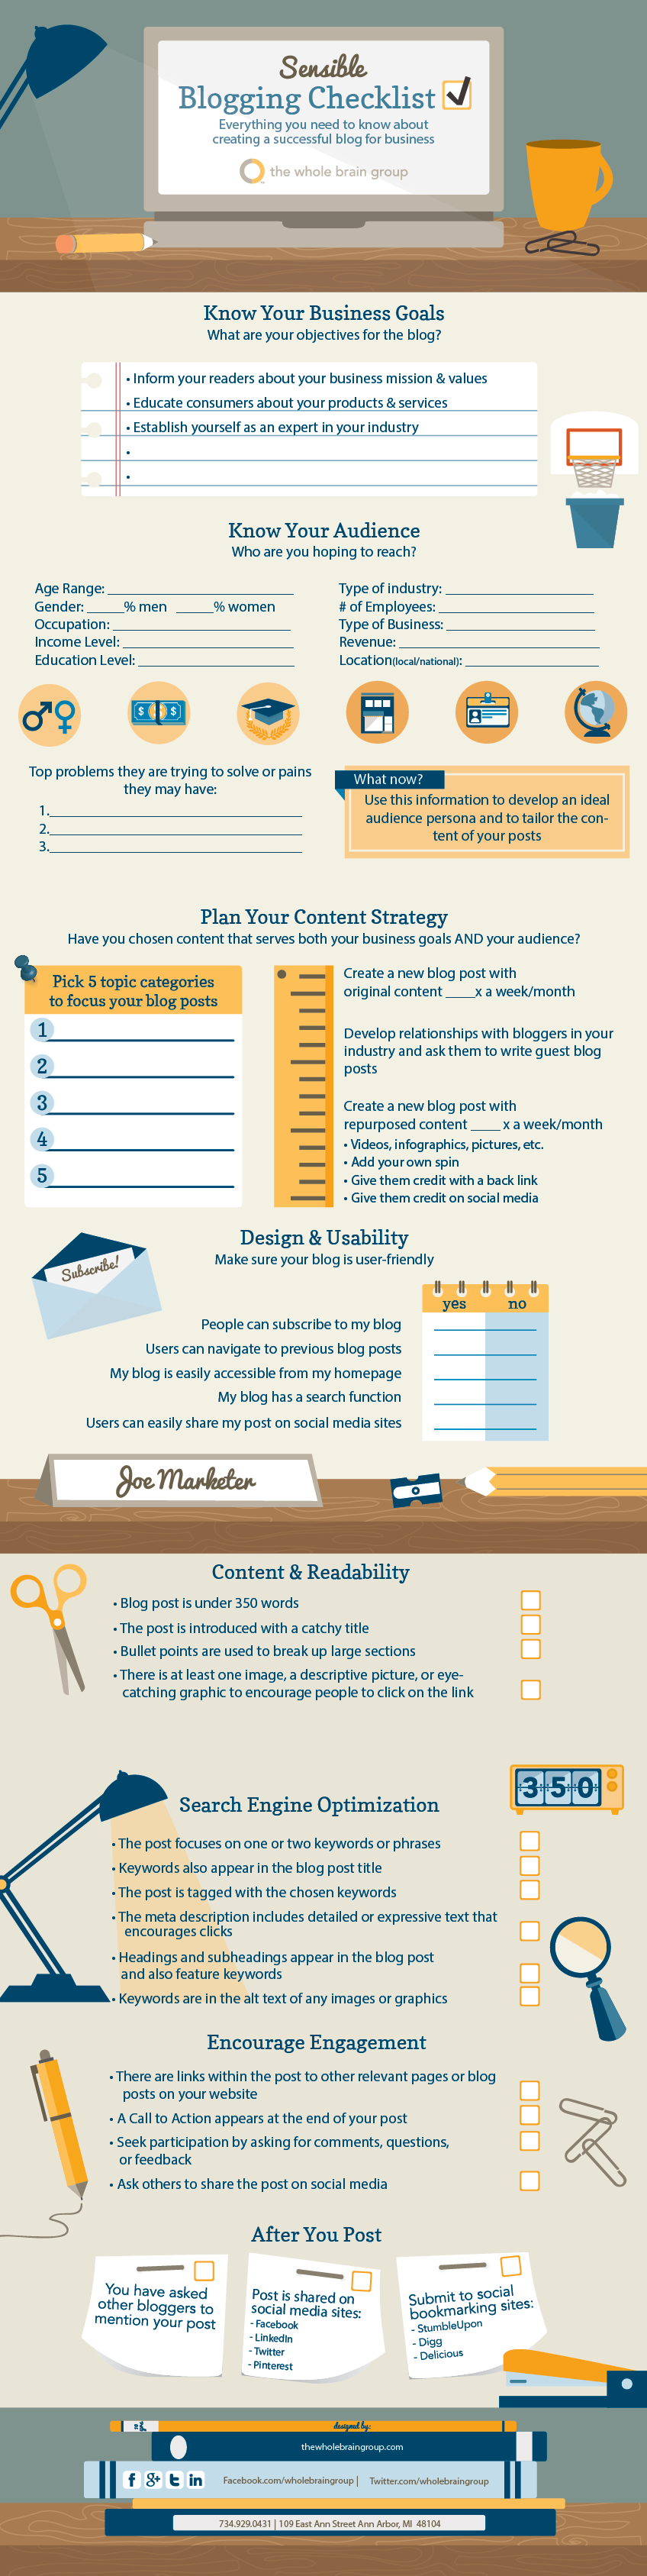 Sensible Blogging Checklist for Small business and brands - #infographic #Blogging